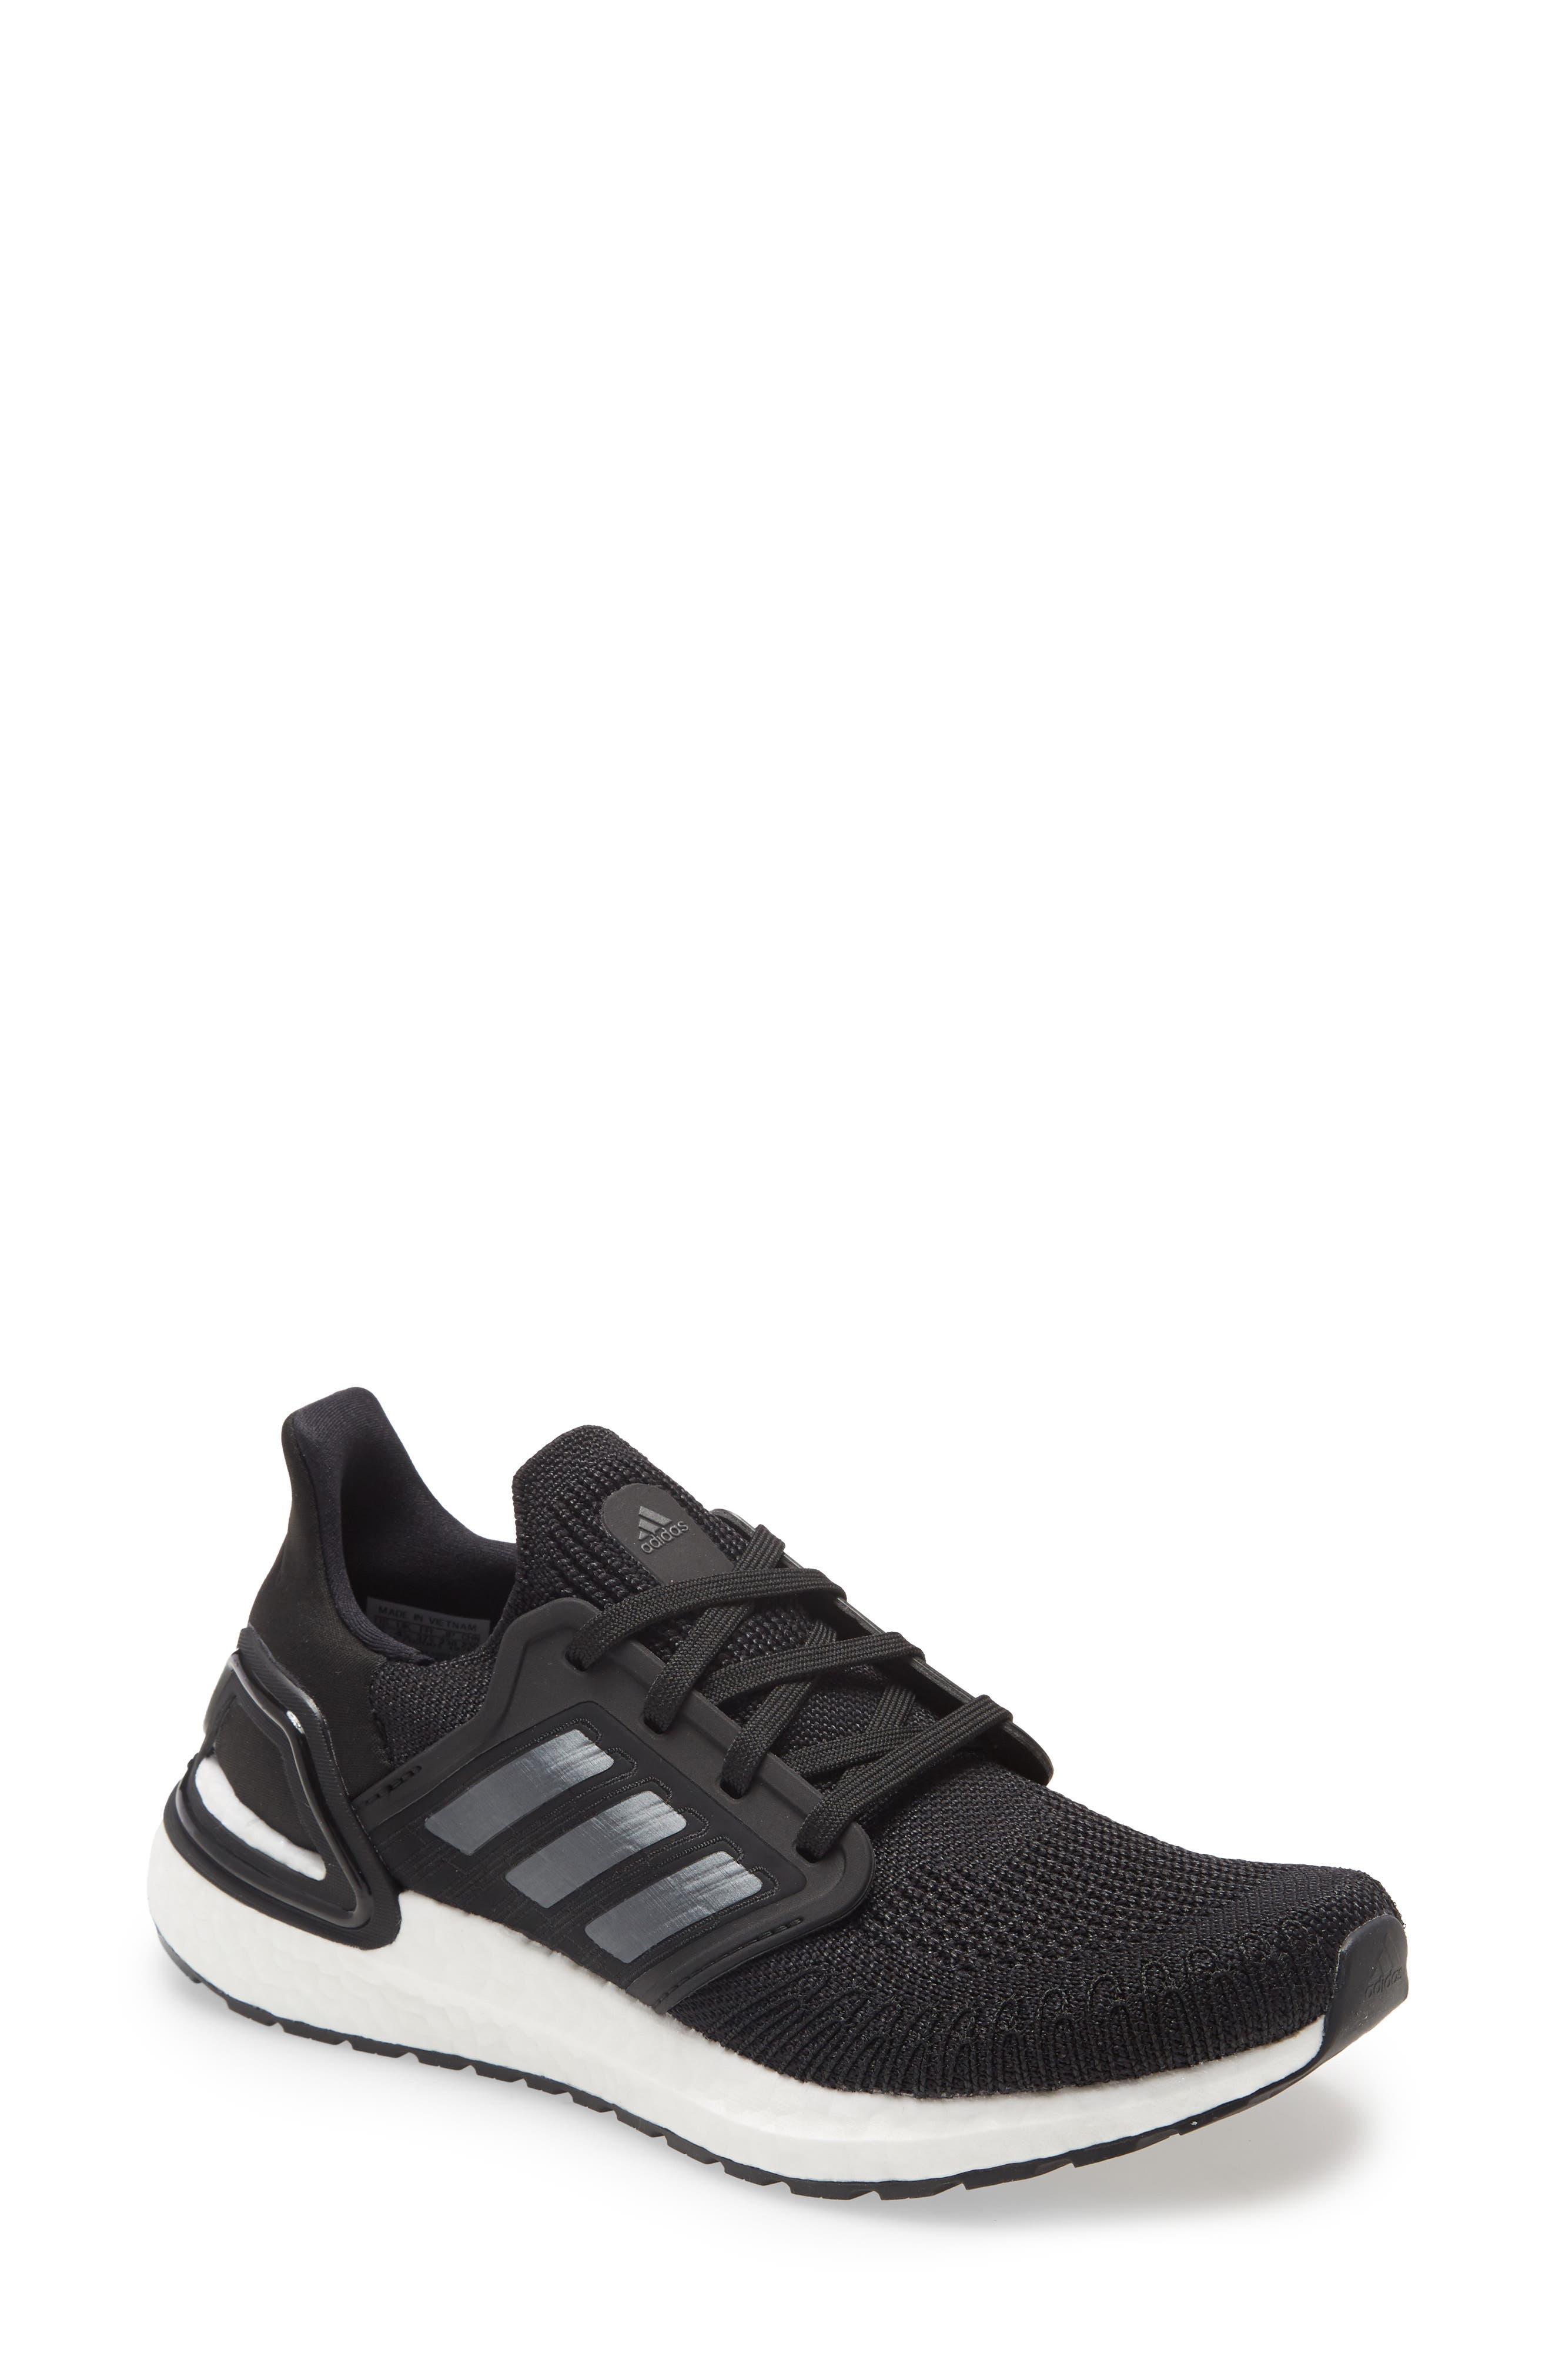 nordstrom adidas womens shoes